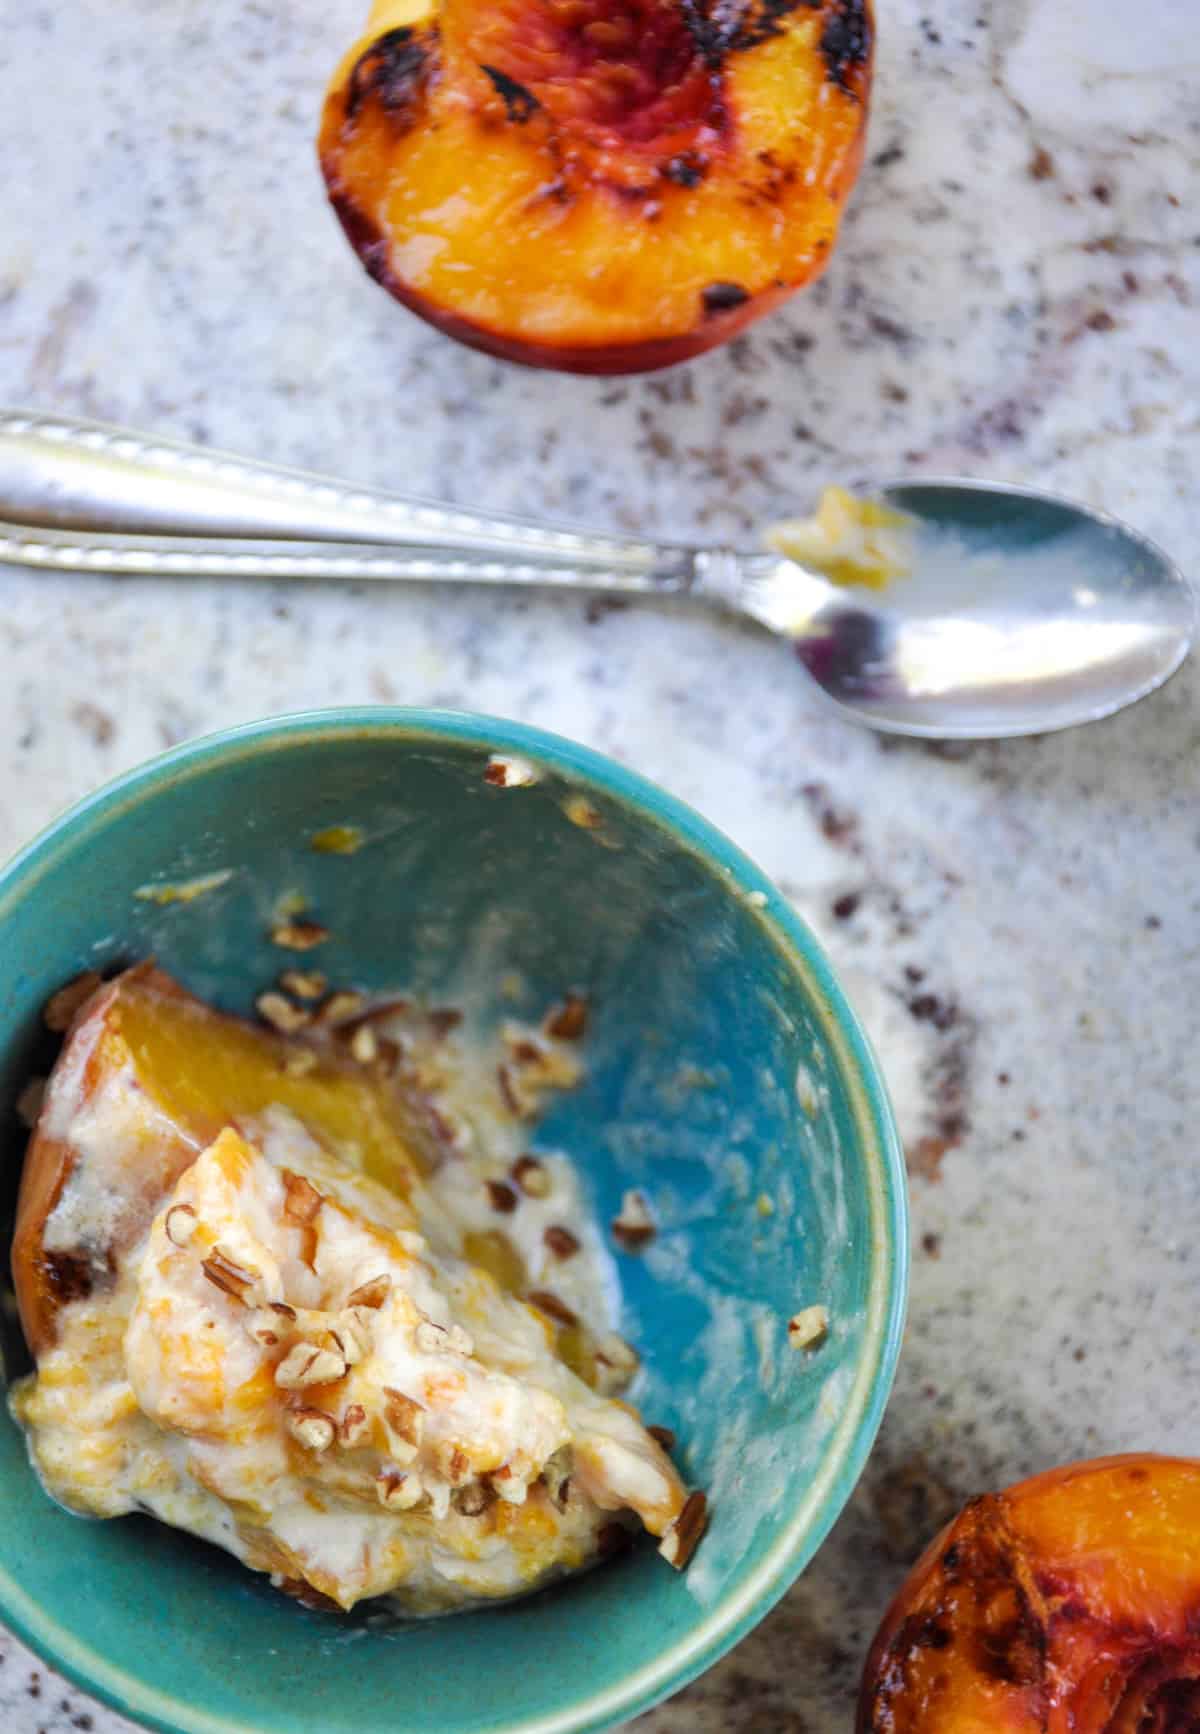 Canned Peach Ice Cream atop Fresh Grilled Peaches